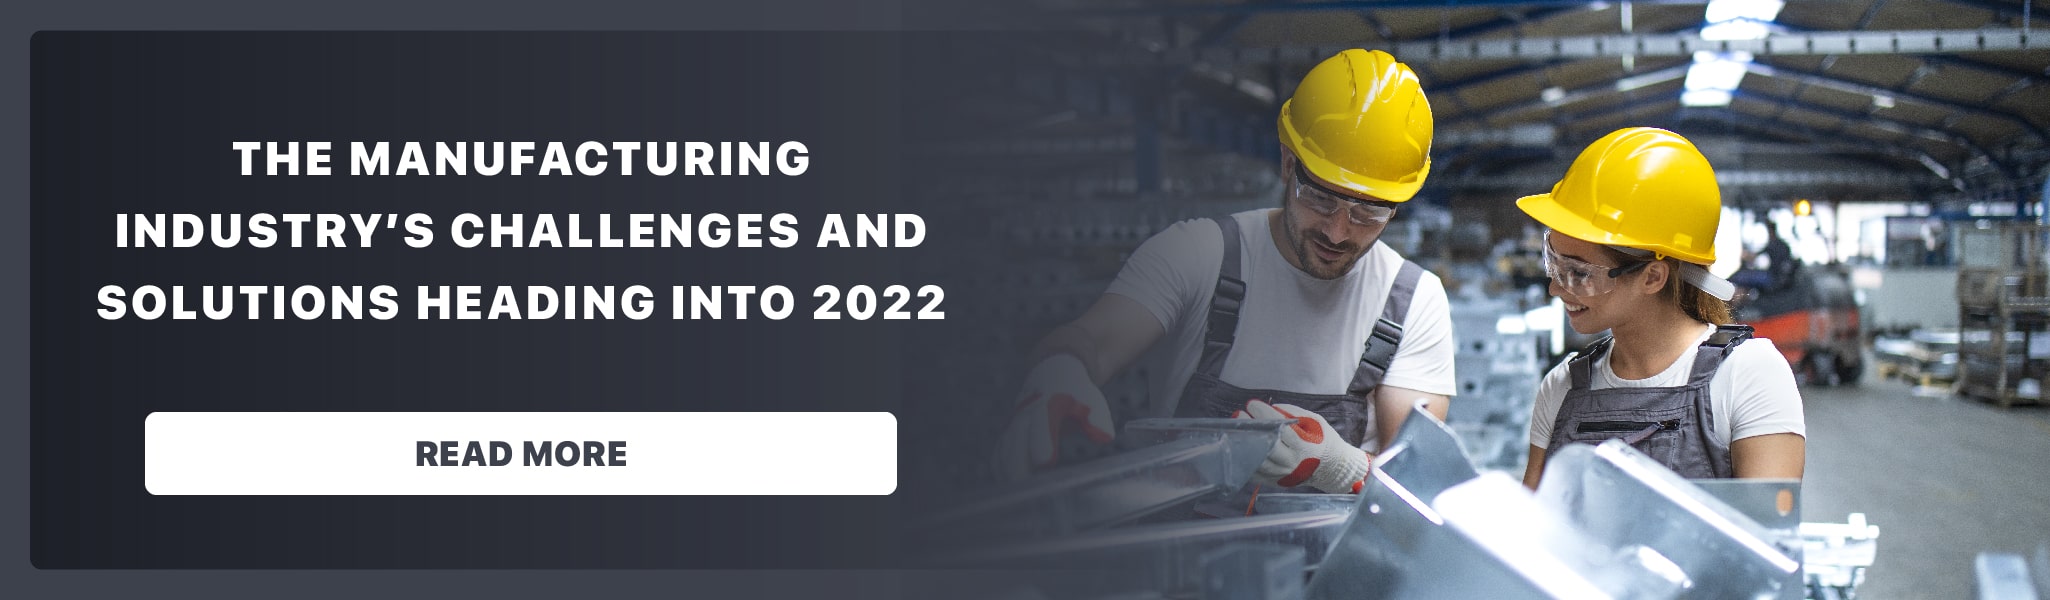 The Manufacturing Industry’s Challenges and Solutions Heading into 2022